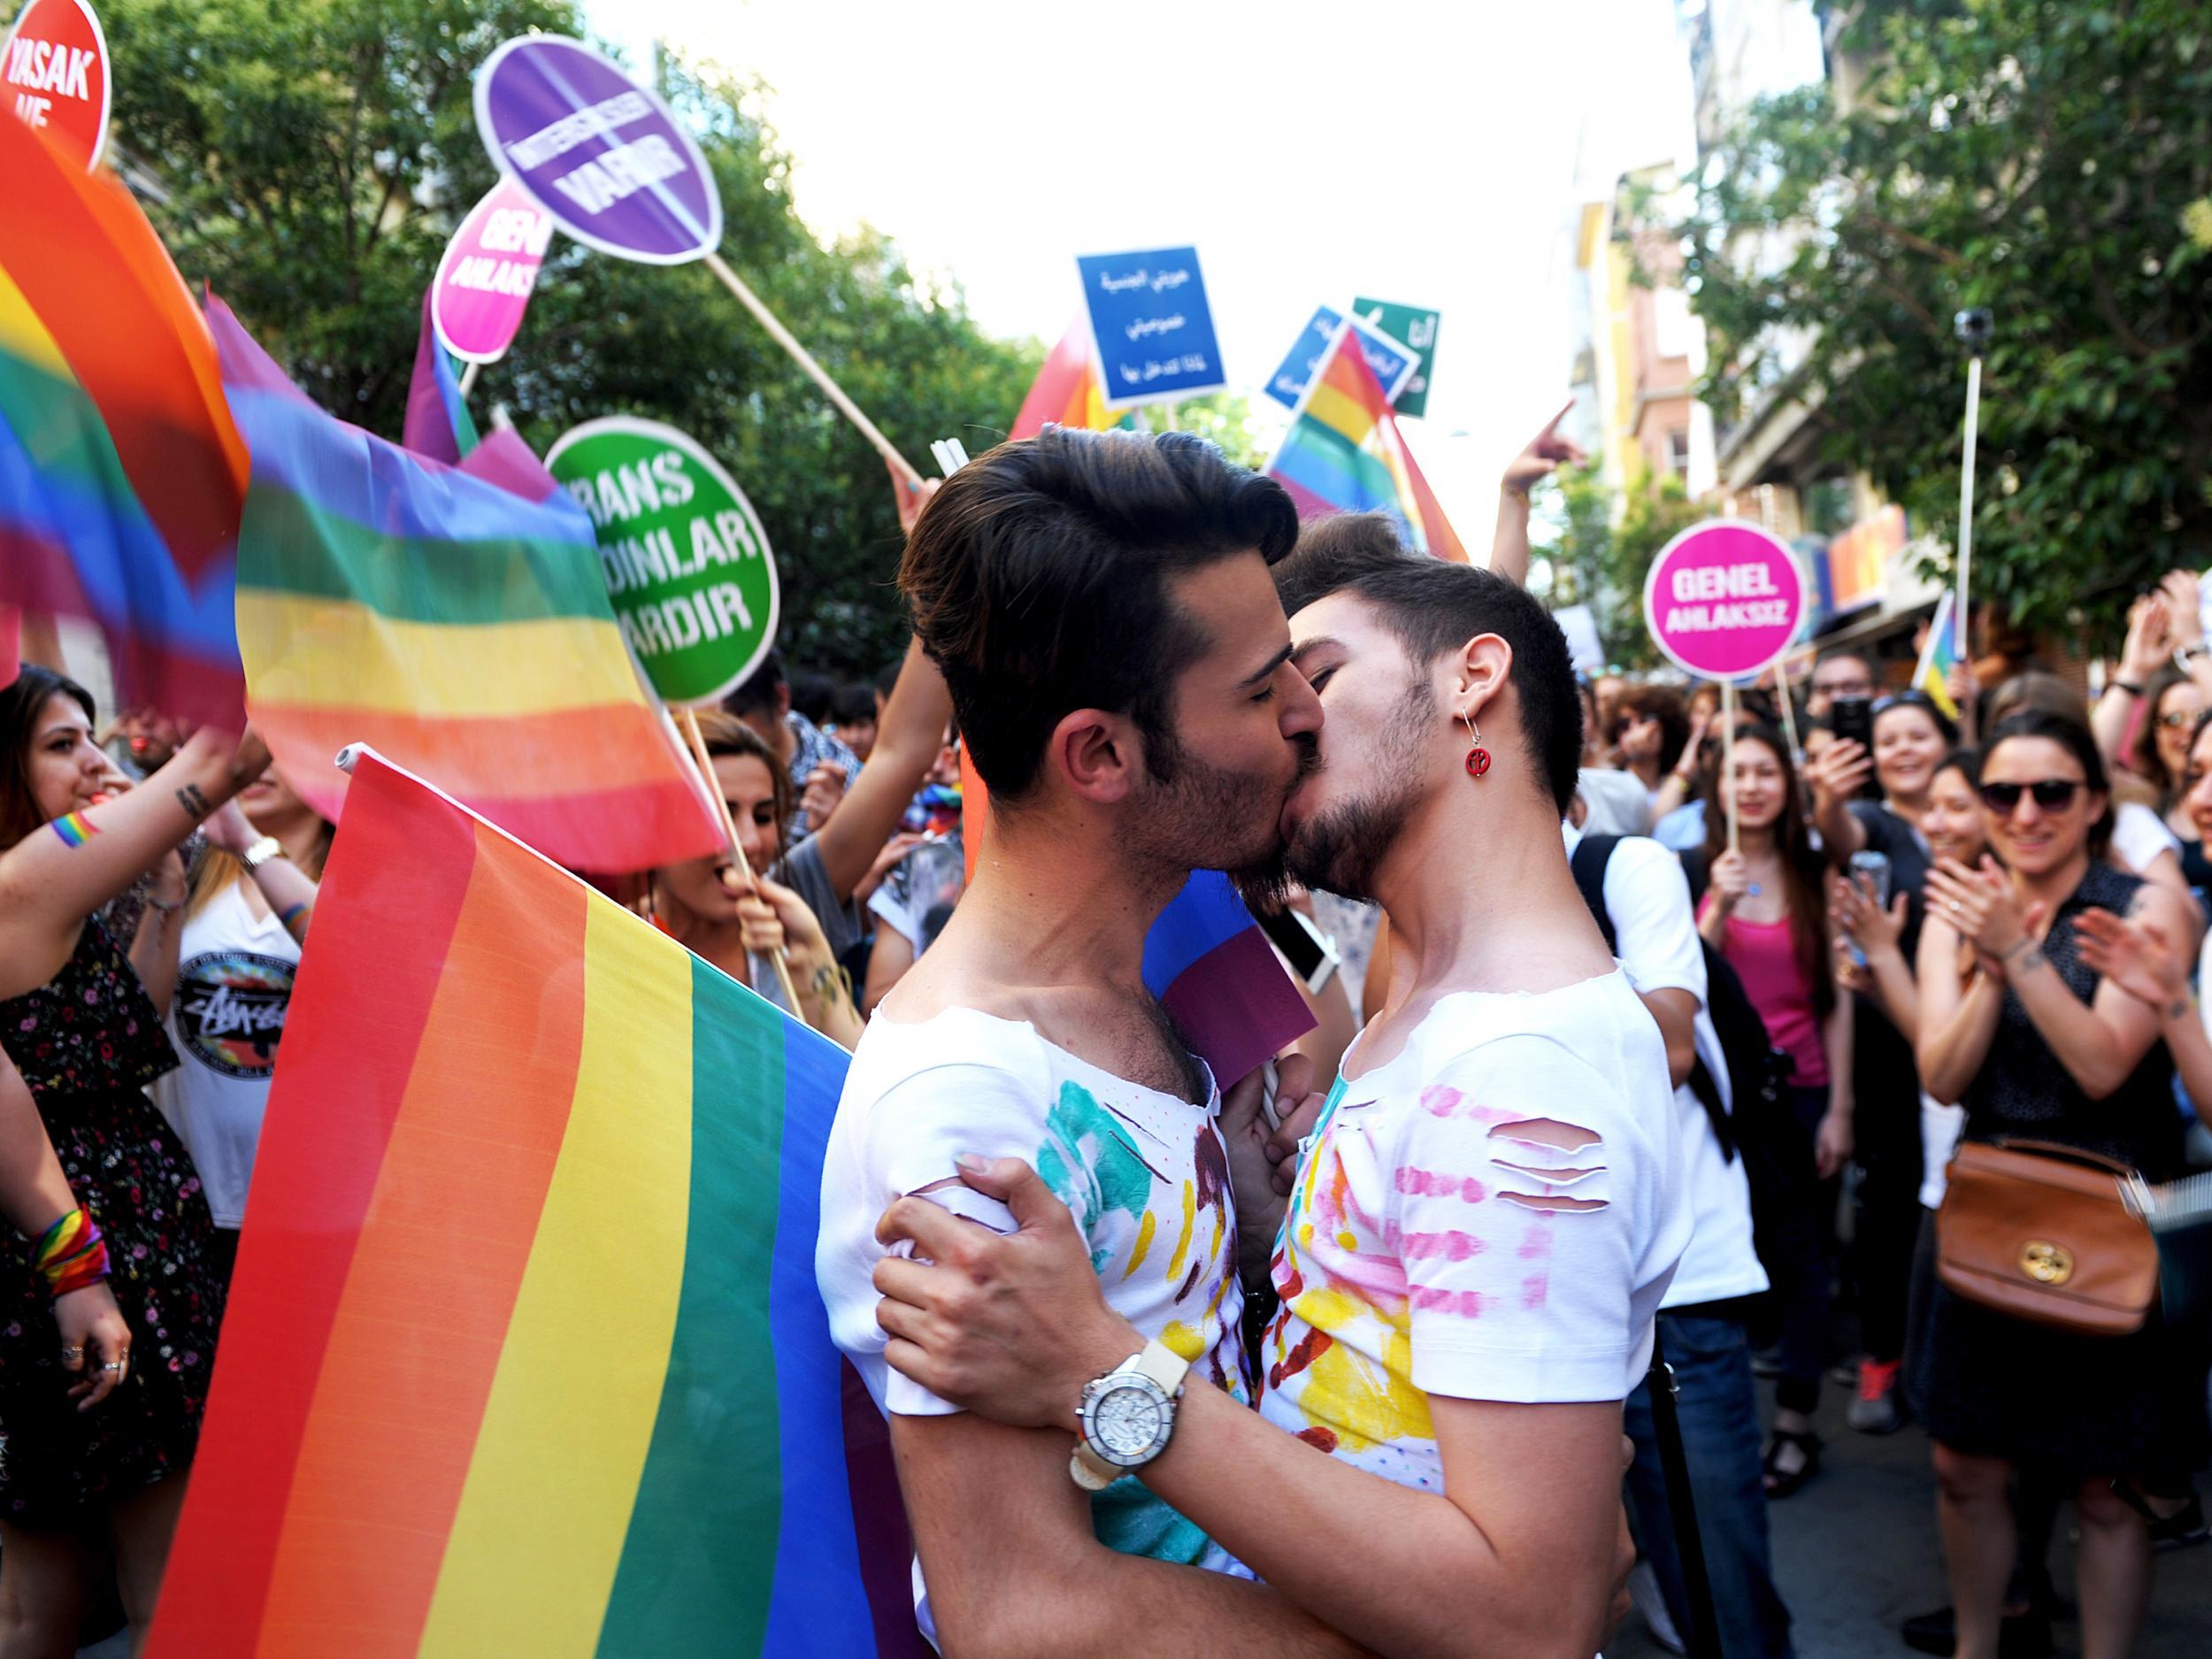 The 2015 Gay Pride parade in Istanbul